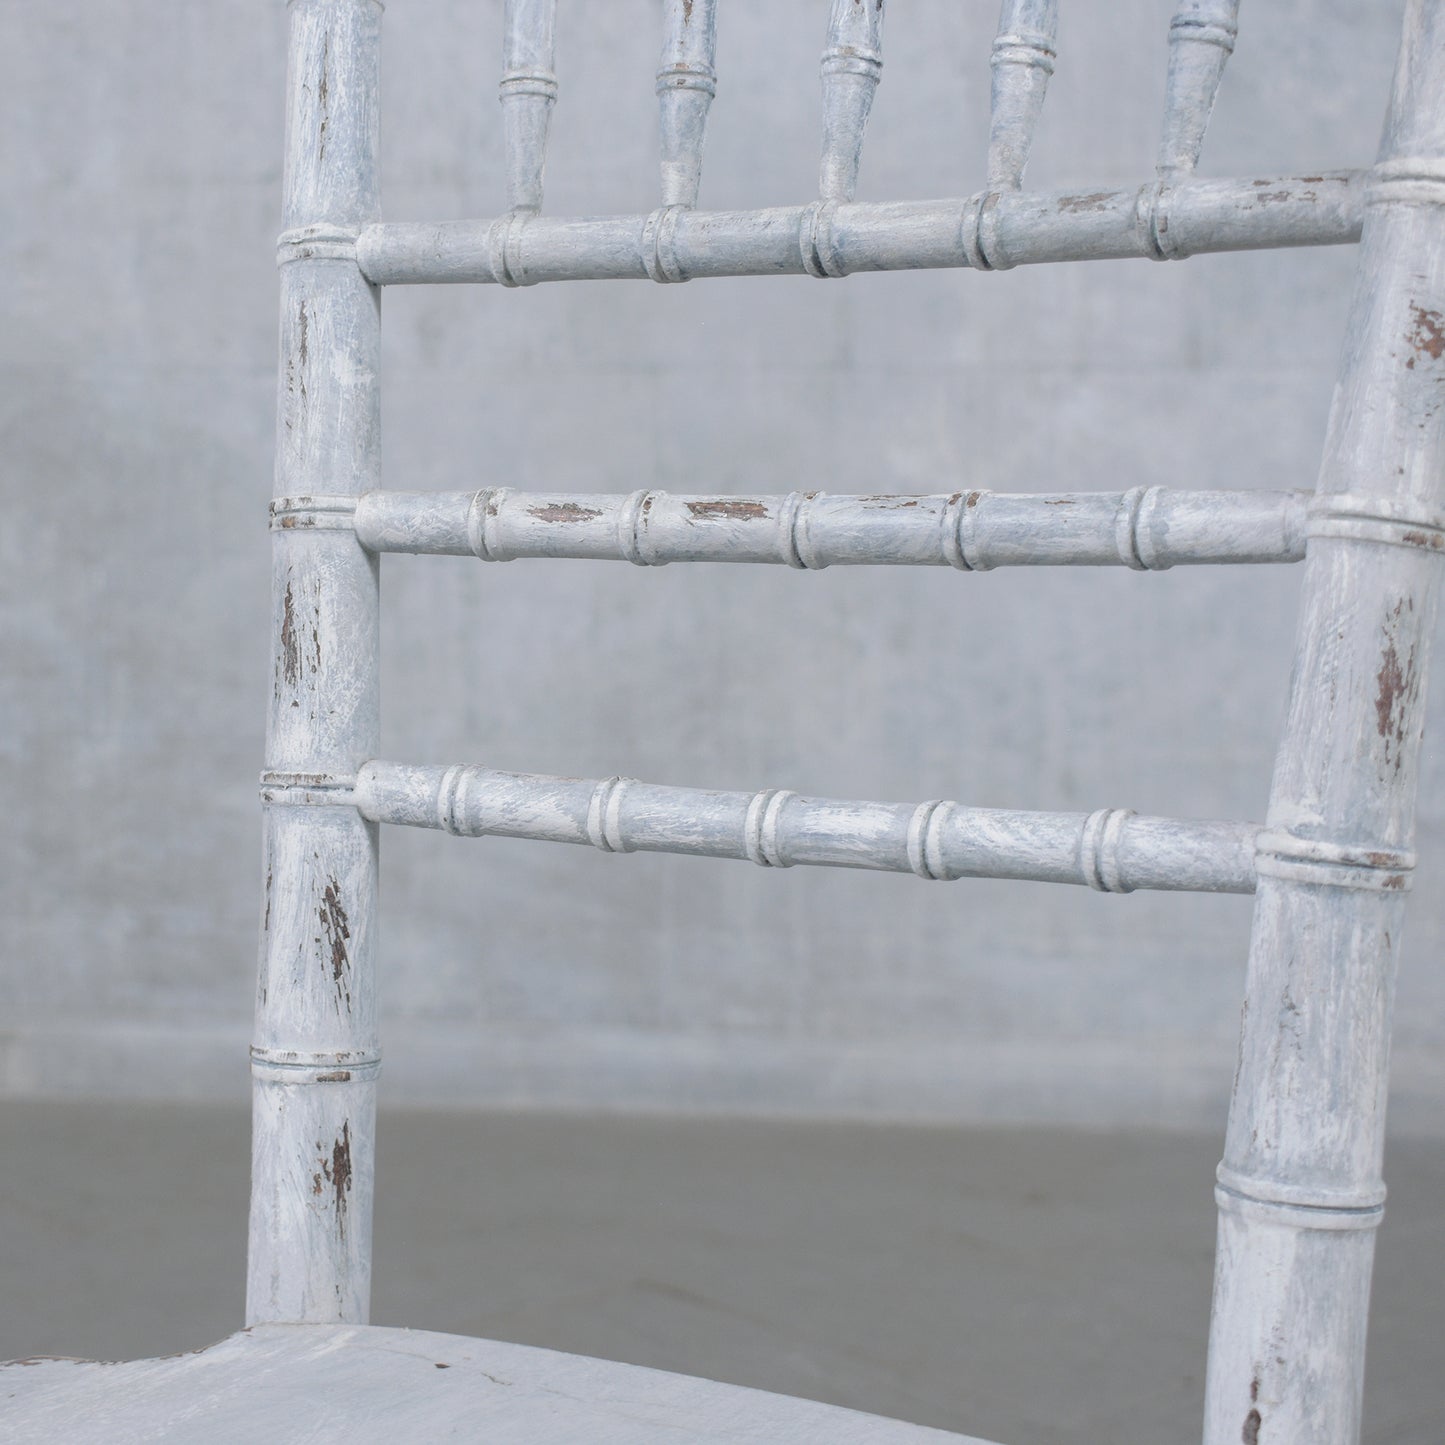 Vintage Chinese Chippendale Dining Chairs: Faux Bamboo Elegance Restored